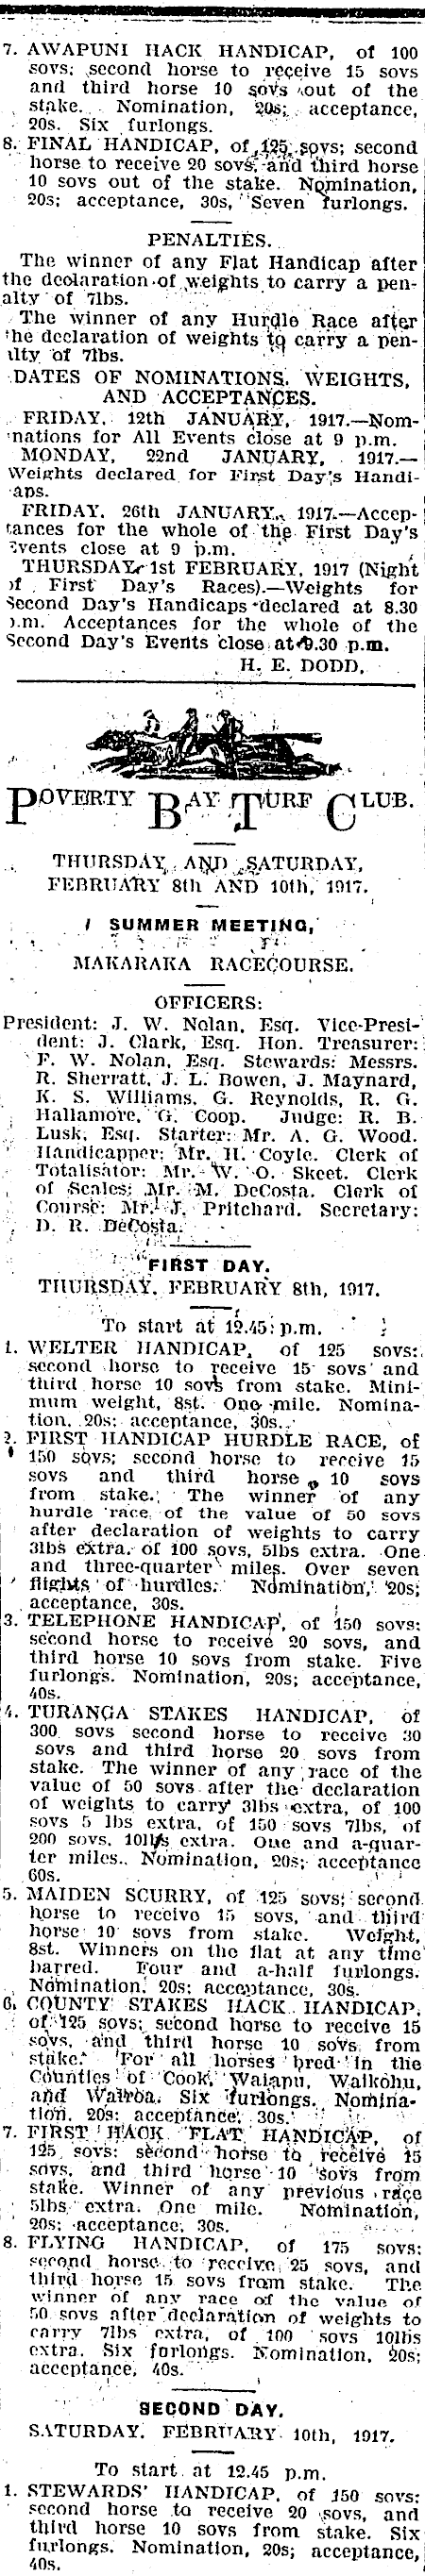 Papers Past Newspapers Poverty Bay Herald 16 December 1916 Page 7 Advertisements Column 1